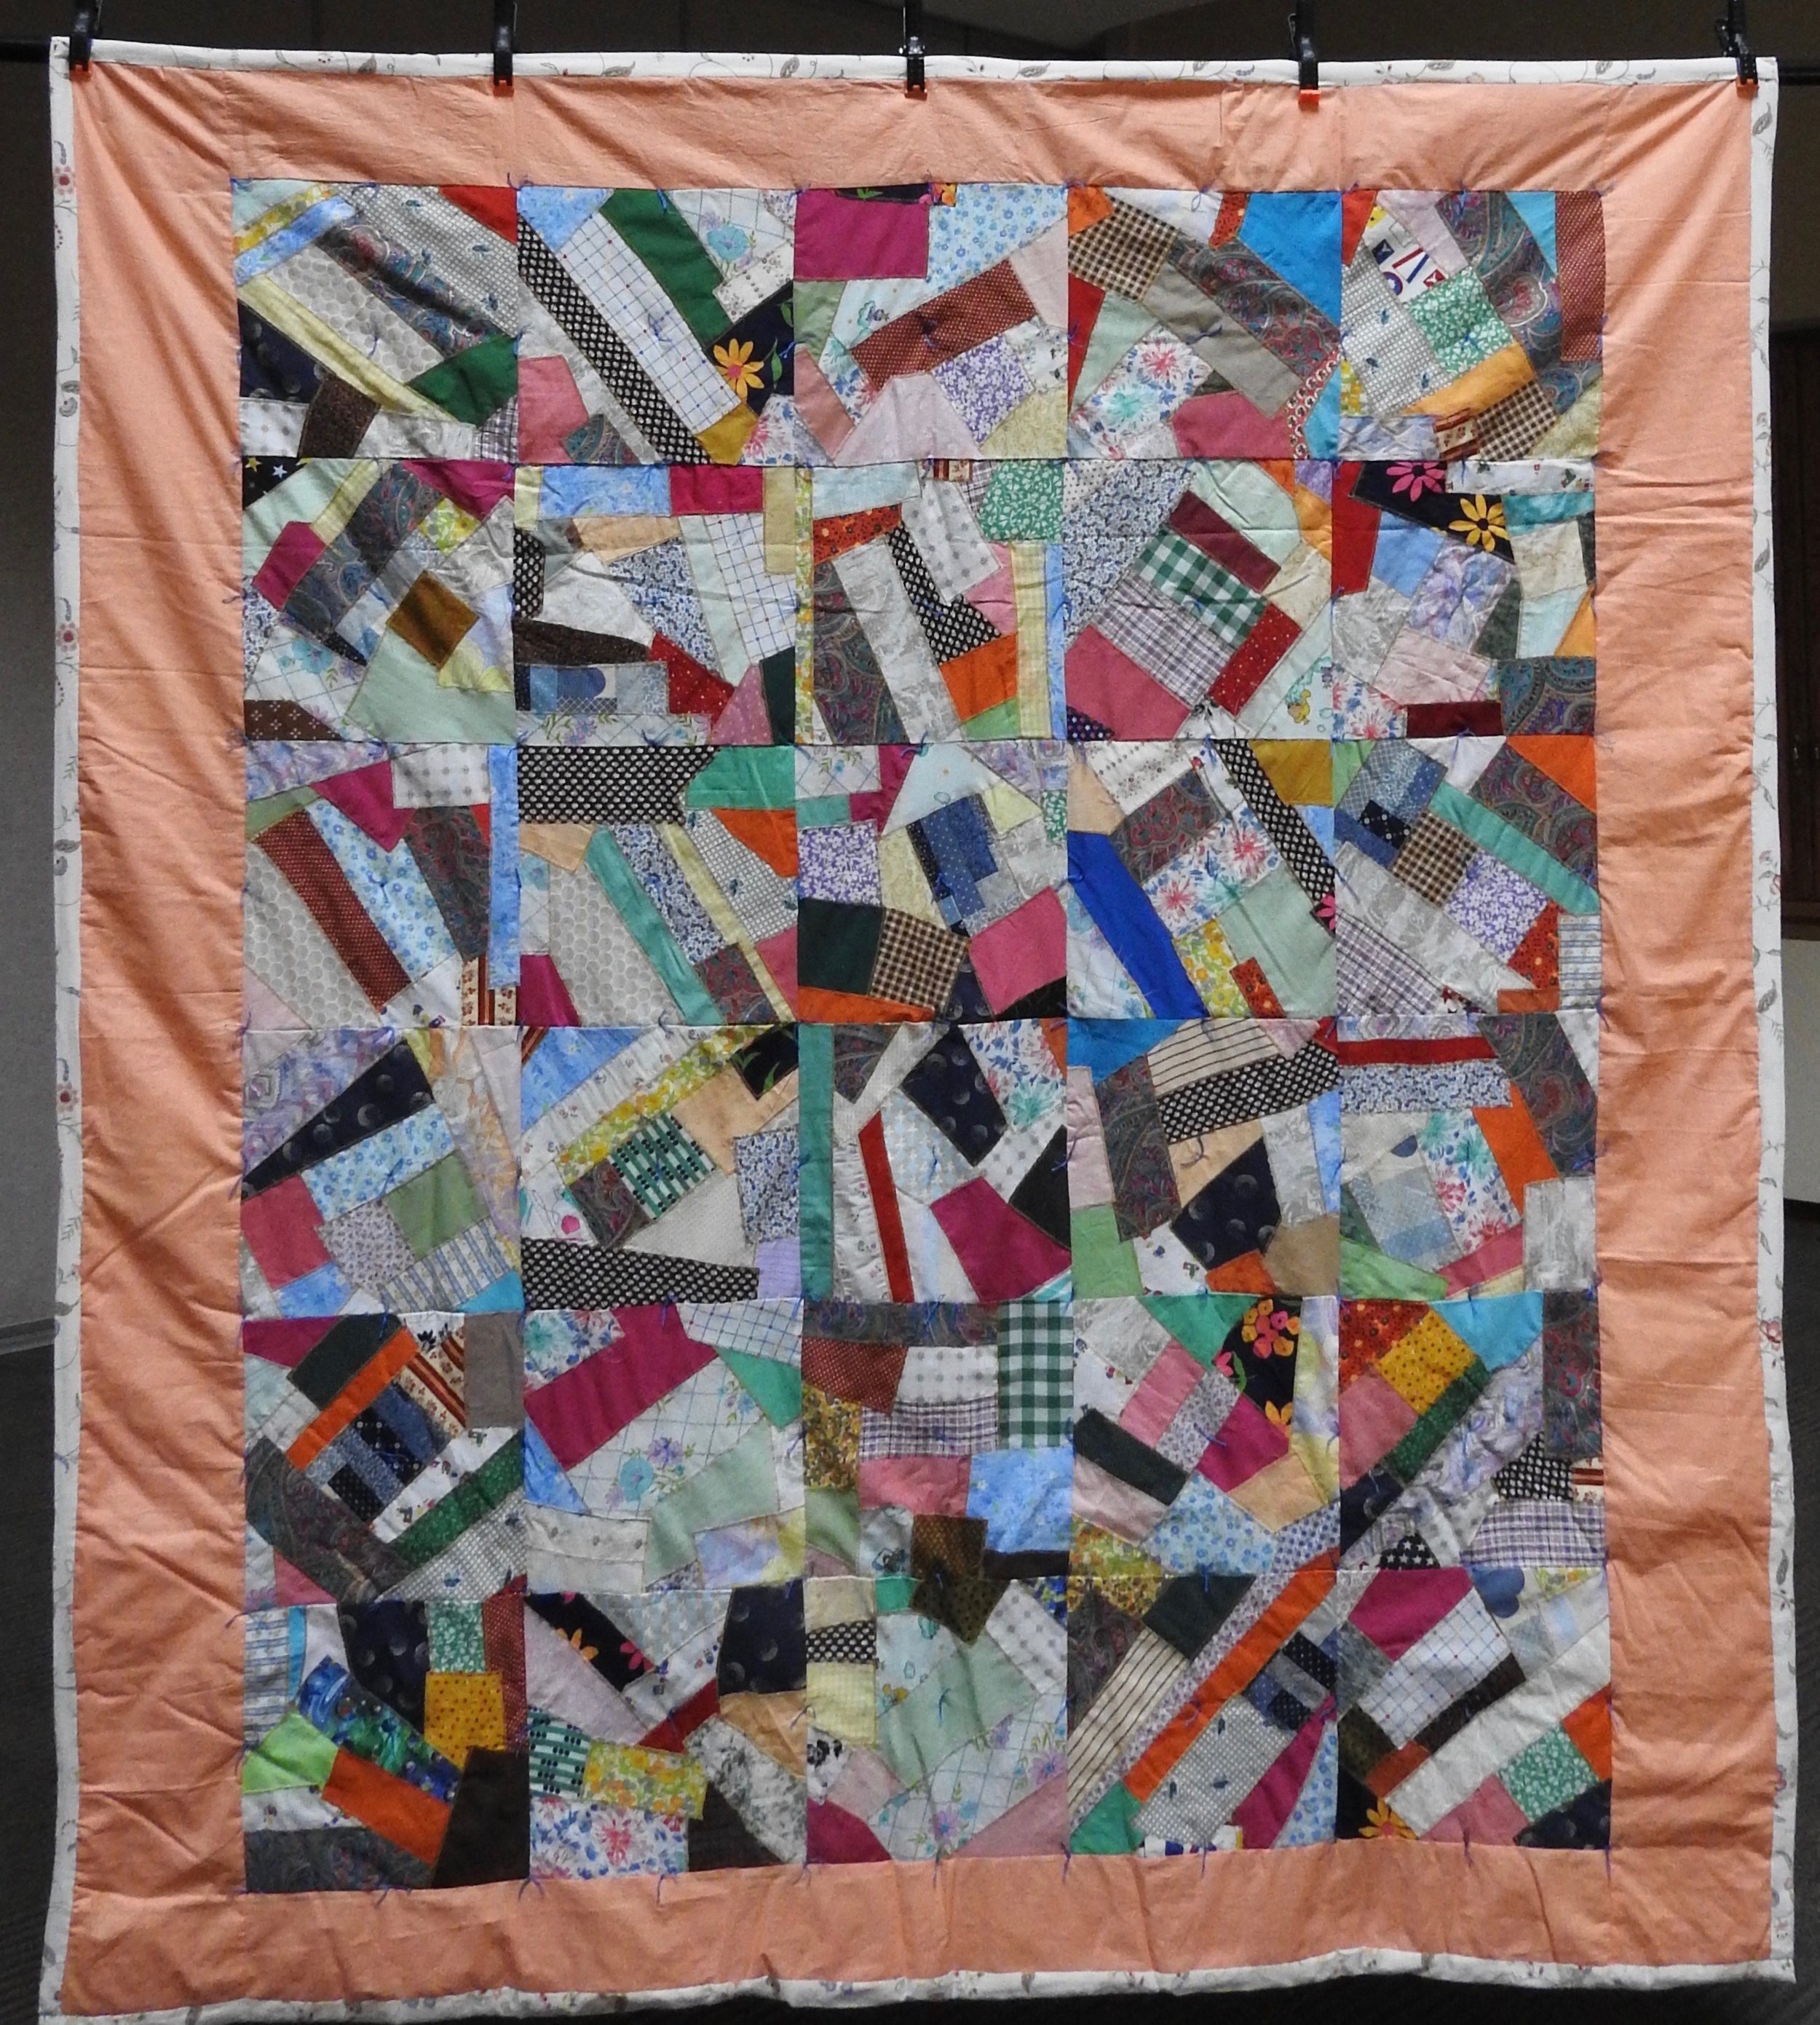 Crazy Blocks-Comforter, Pieced &amp; Knotted, Donated Anonymously, 68 x 70”